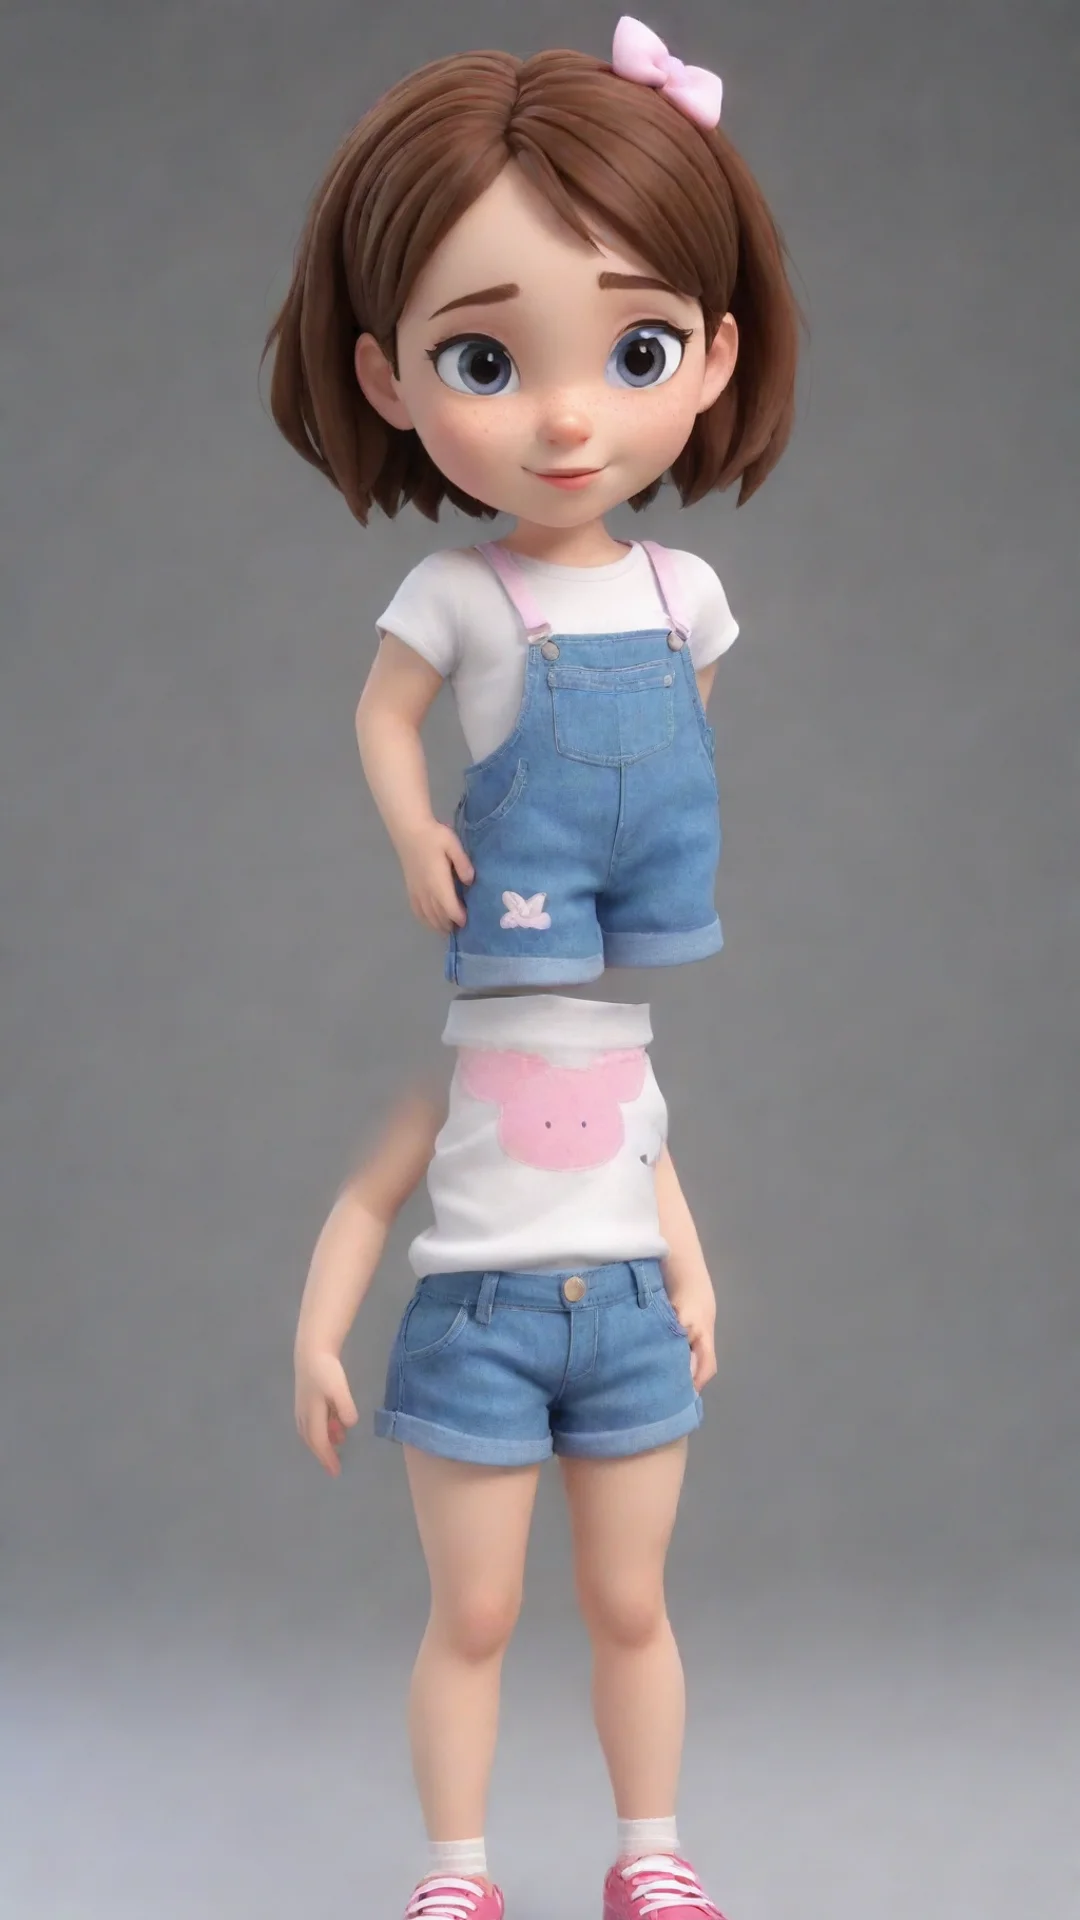 amazing little girl in shorts cartoon 3d awesome portrait 2 hdtall